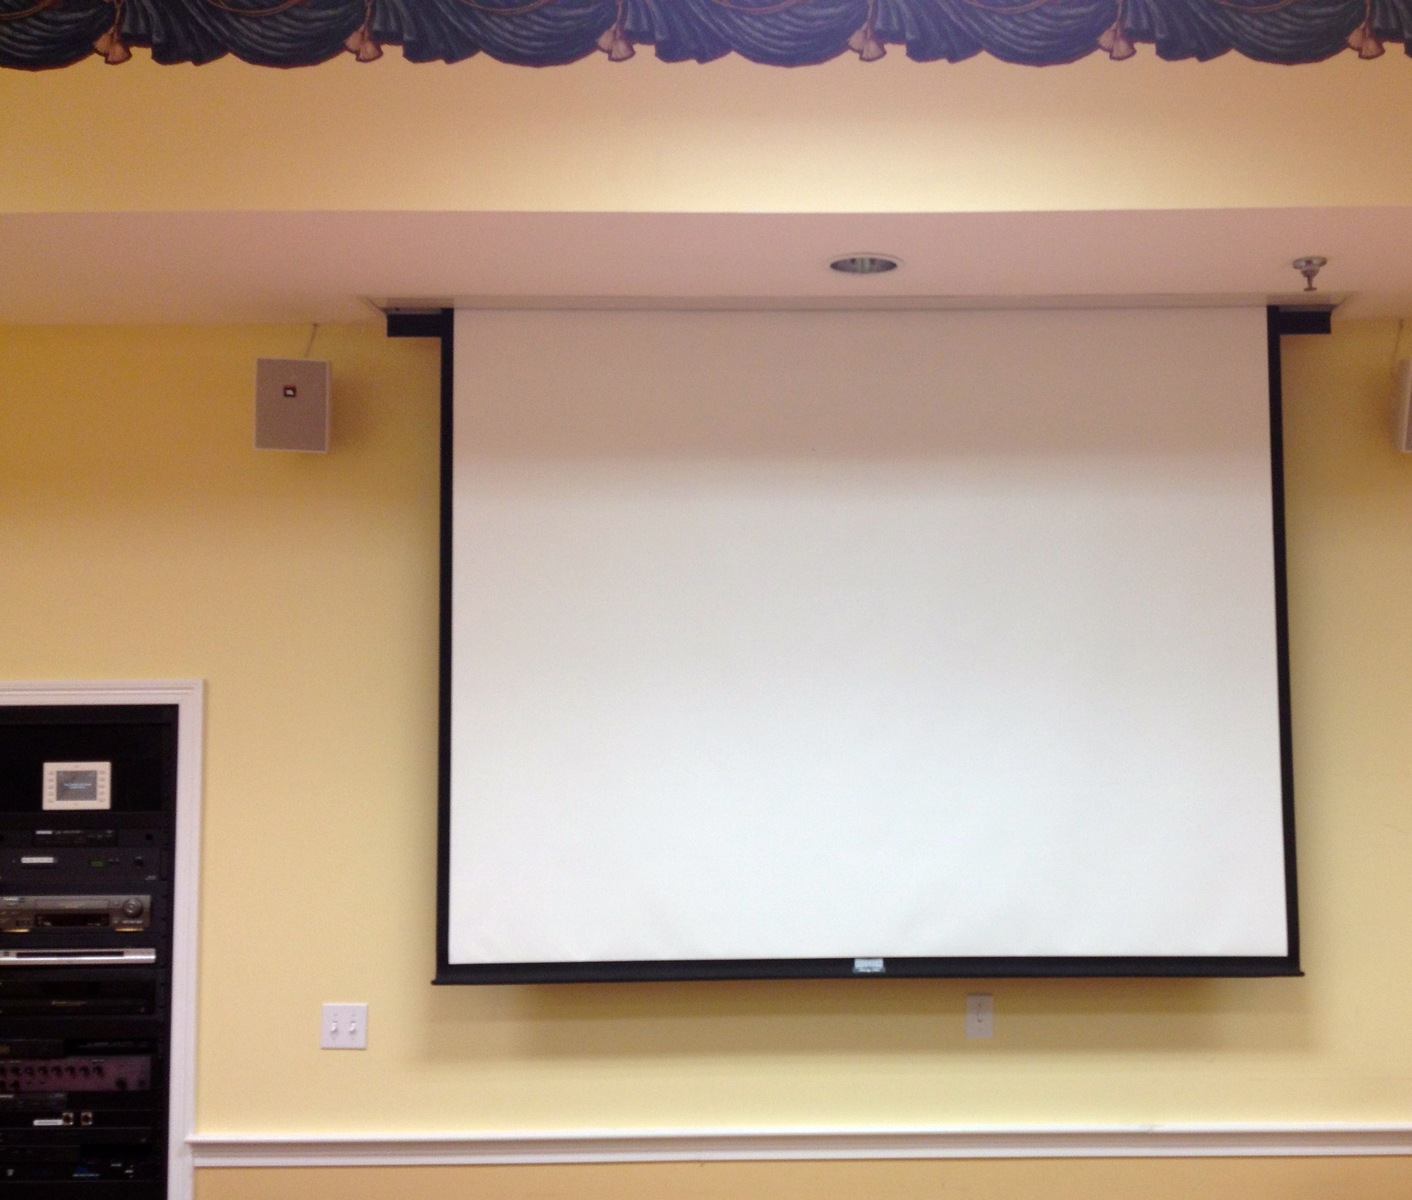 How To Retract A Projector Screen